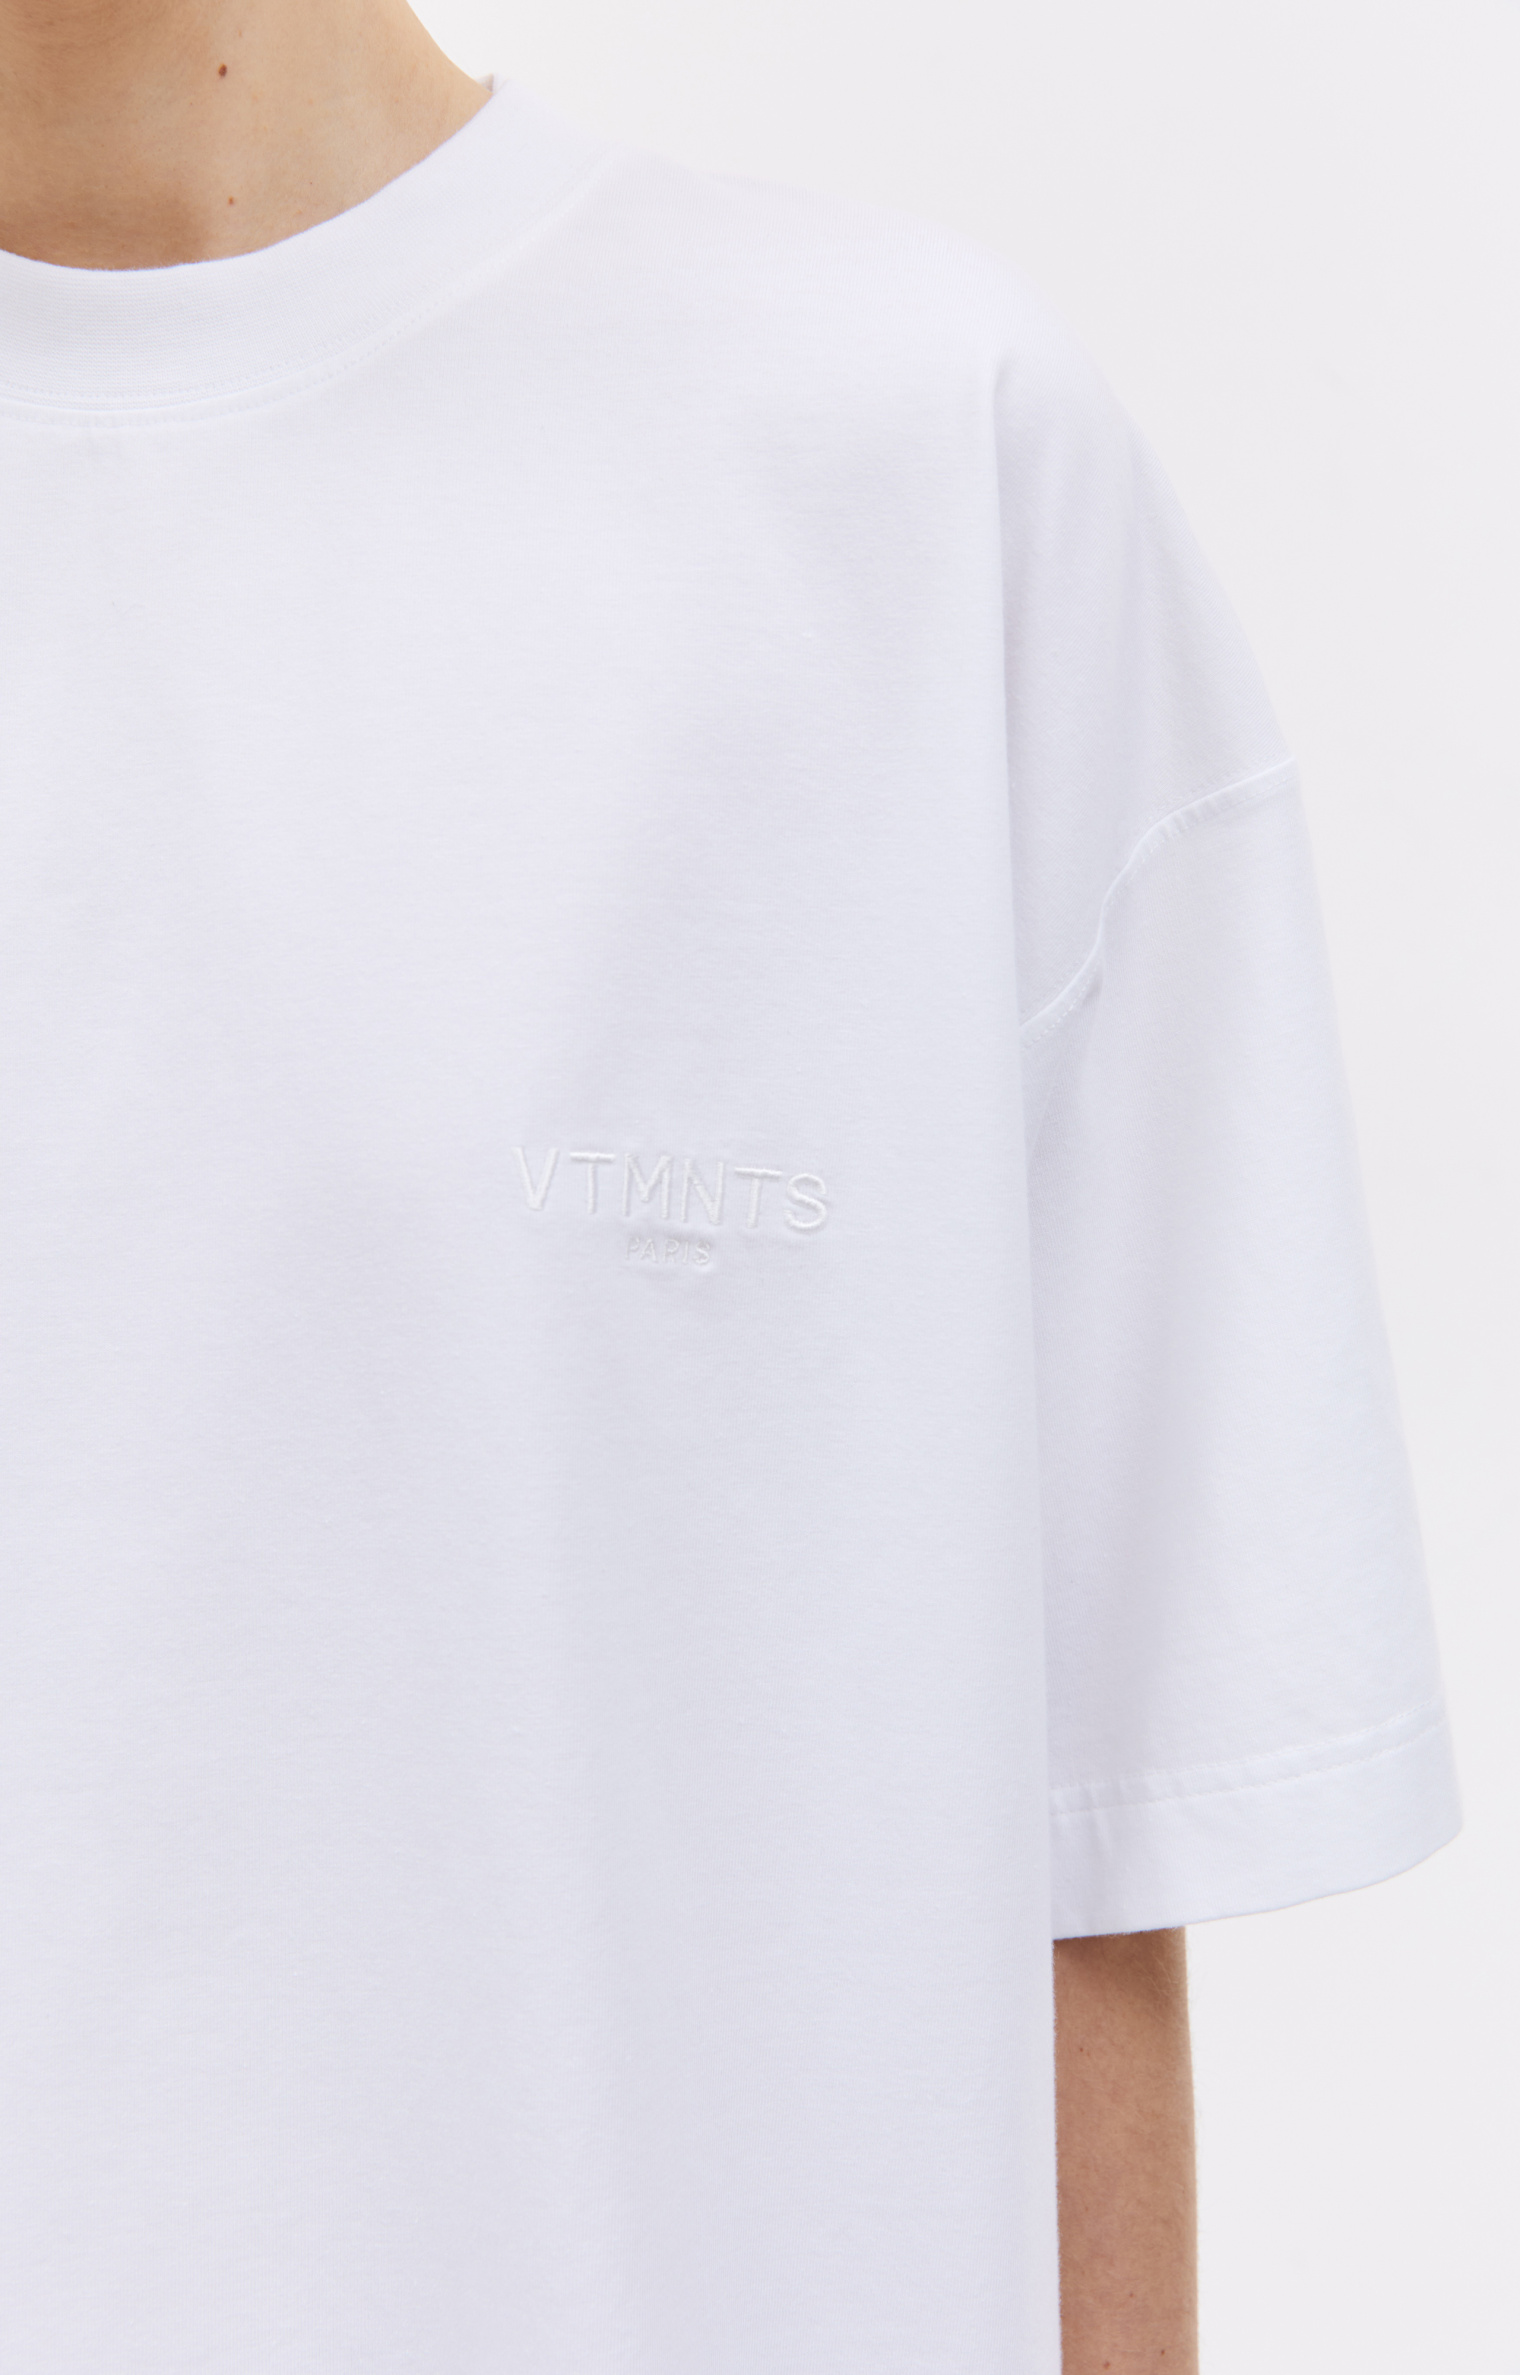 VTMNTS Logo embroidered t-shirt